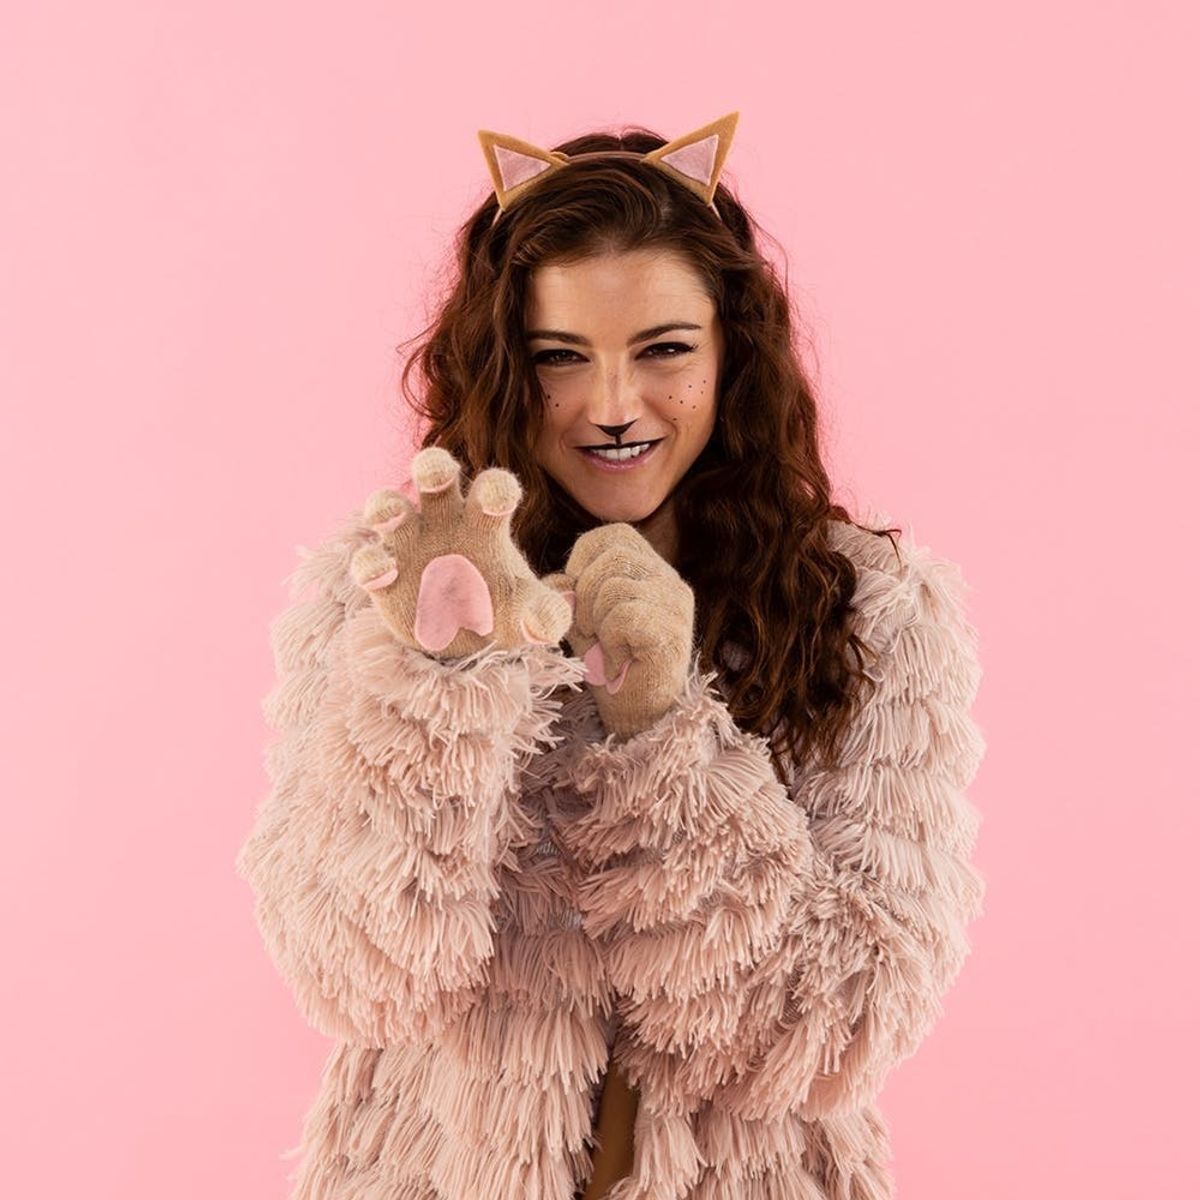 52 Teen Halloween Costume Ideas including the Cat's Meow